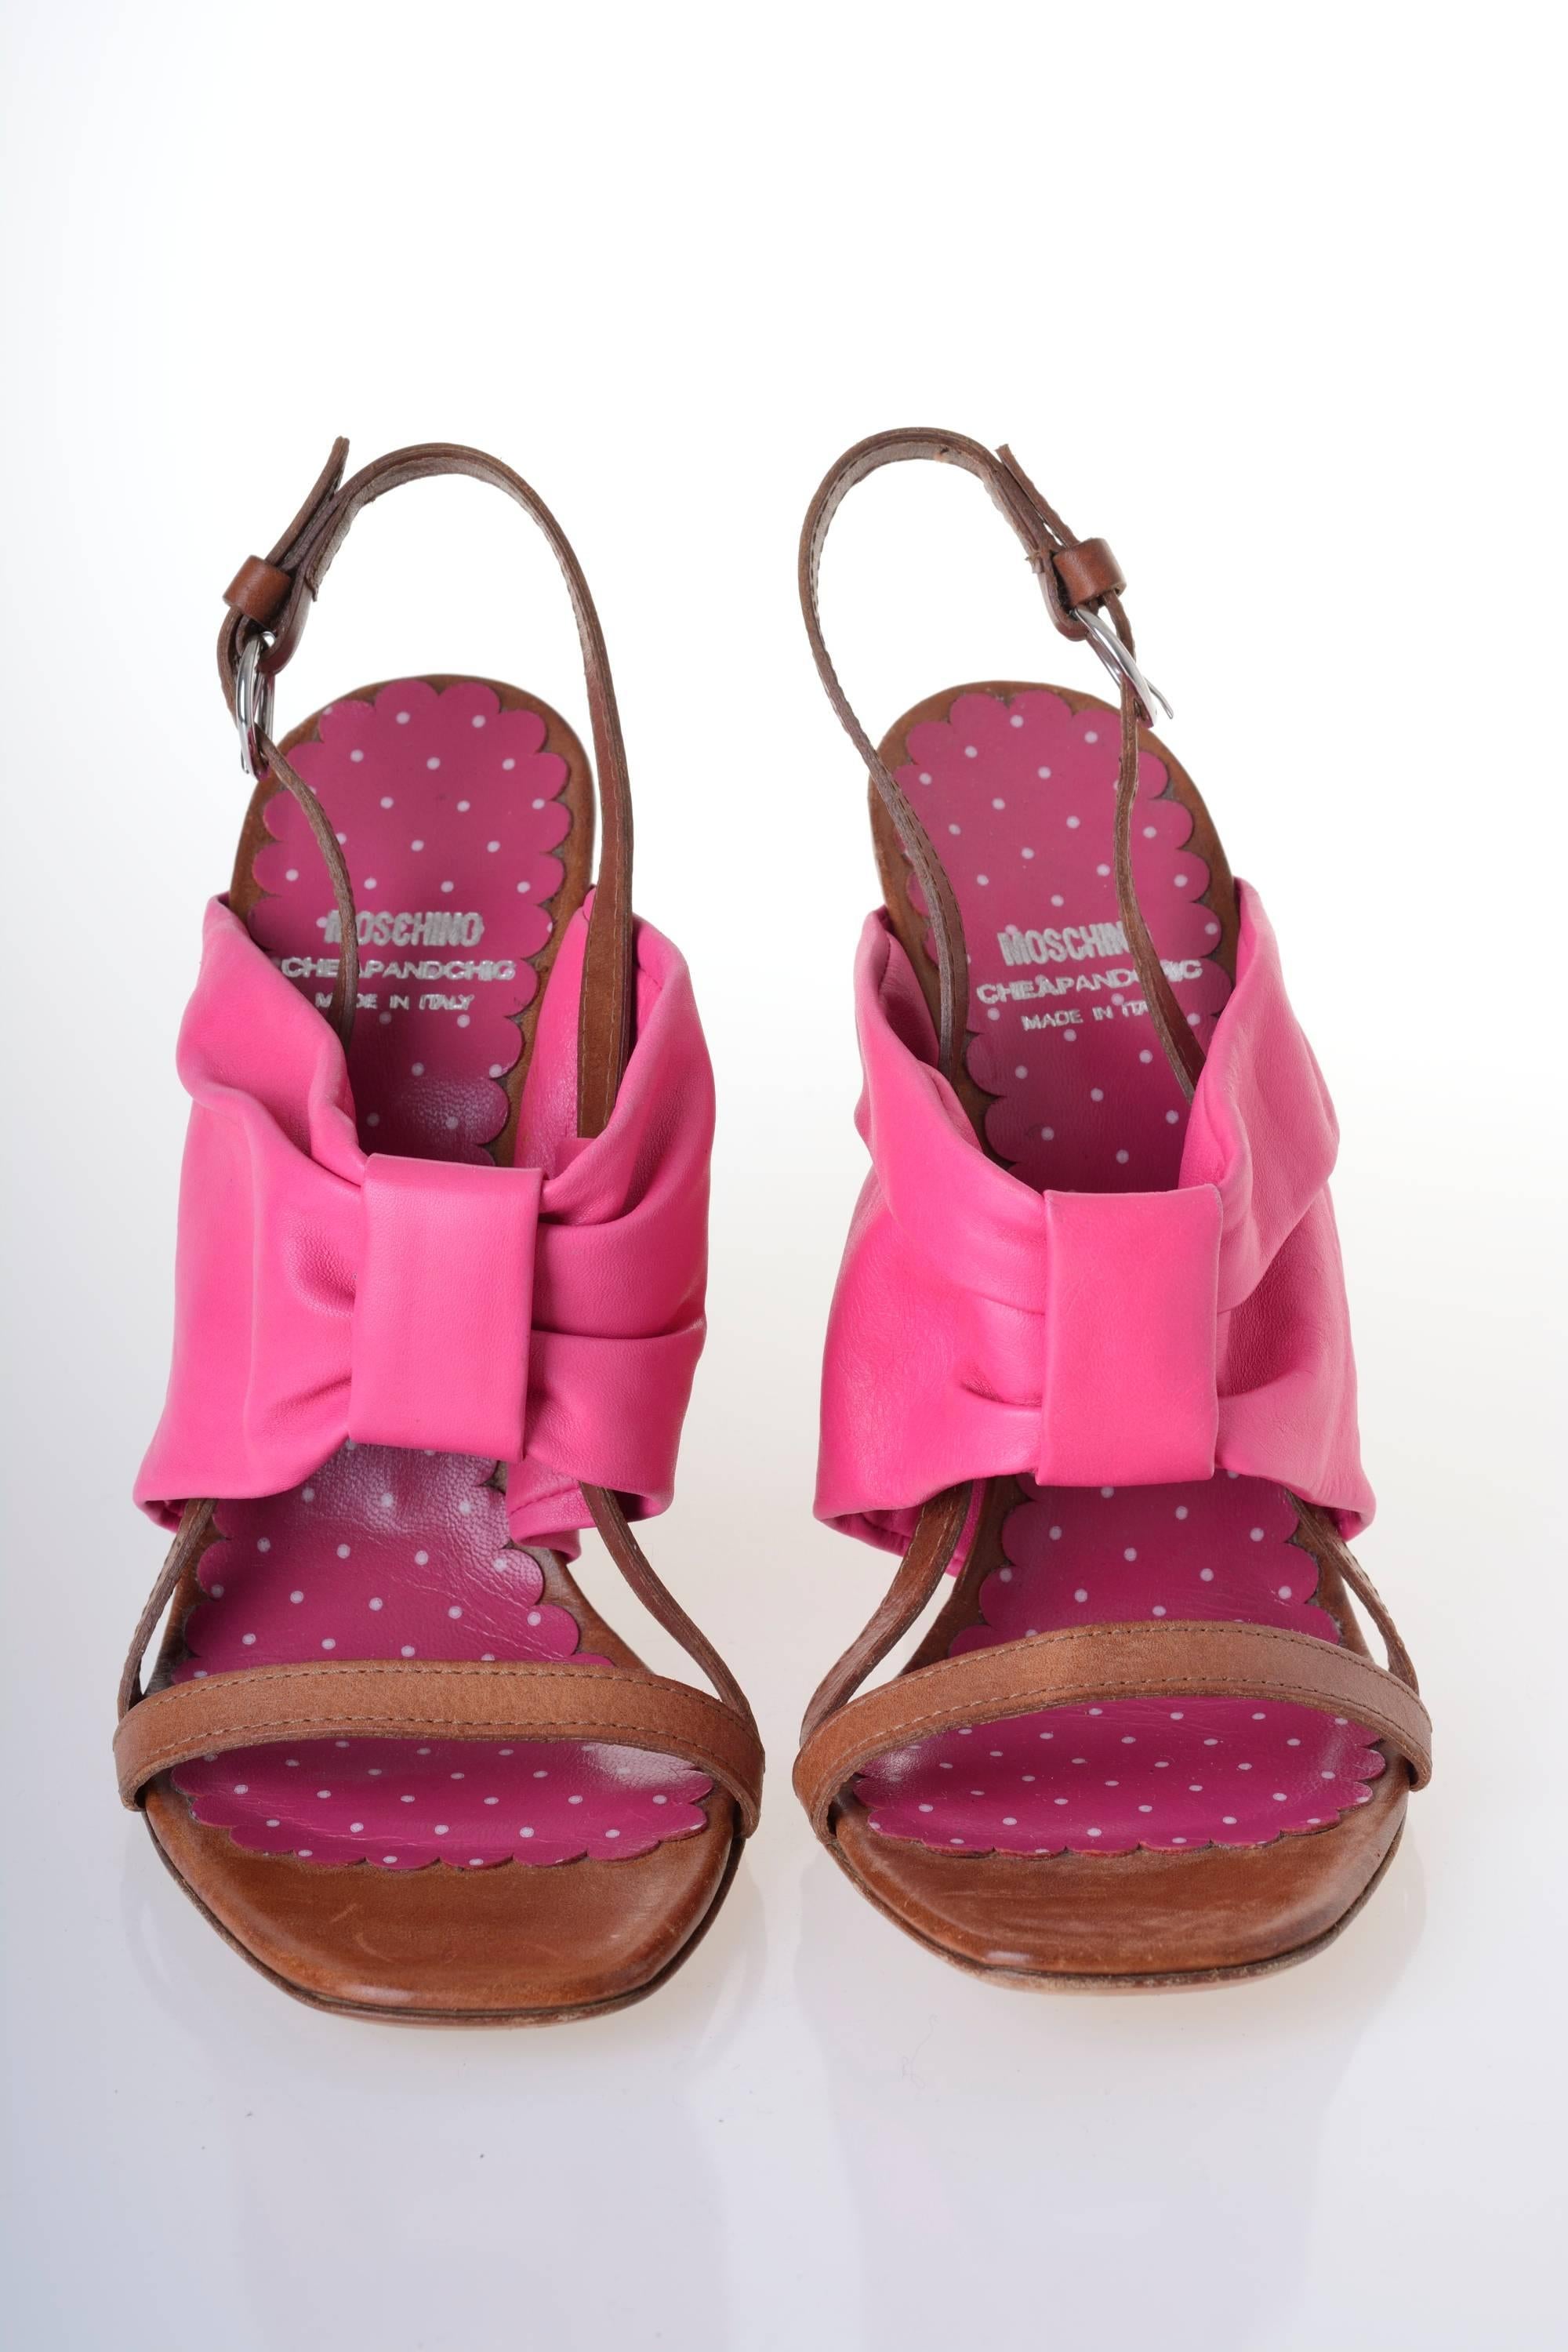 These lovely sass wedges add a great burst of sunshine to any look!
Tan leather with fuchsia bow inspired strap.
Slingback heel with buckle closure.
Stacked wood wedge heel.
Leather sole.
Fuchsia polka dot print leather insole.
Shoes are in